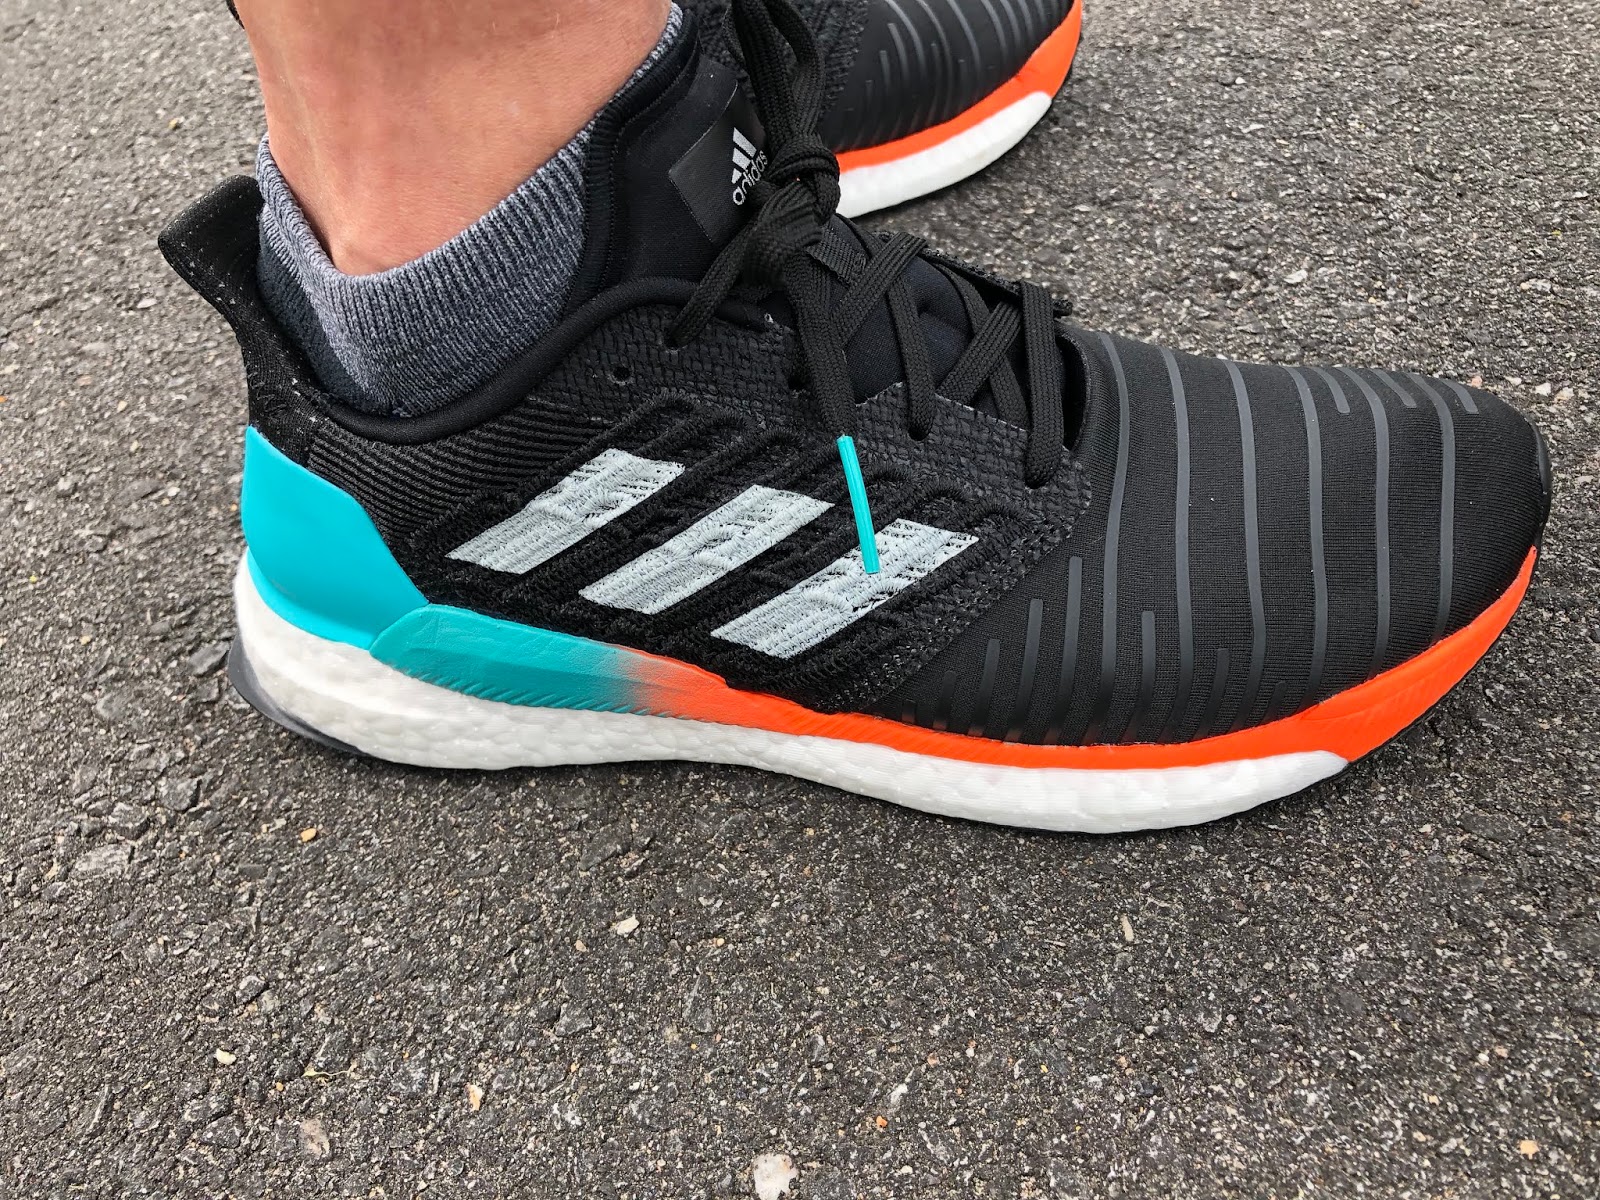 Road Trail Run: adidas Solar Boost Initial Splashy Tropical Vibe. Lively yet Mellow Ride